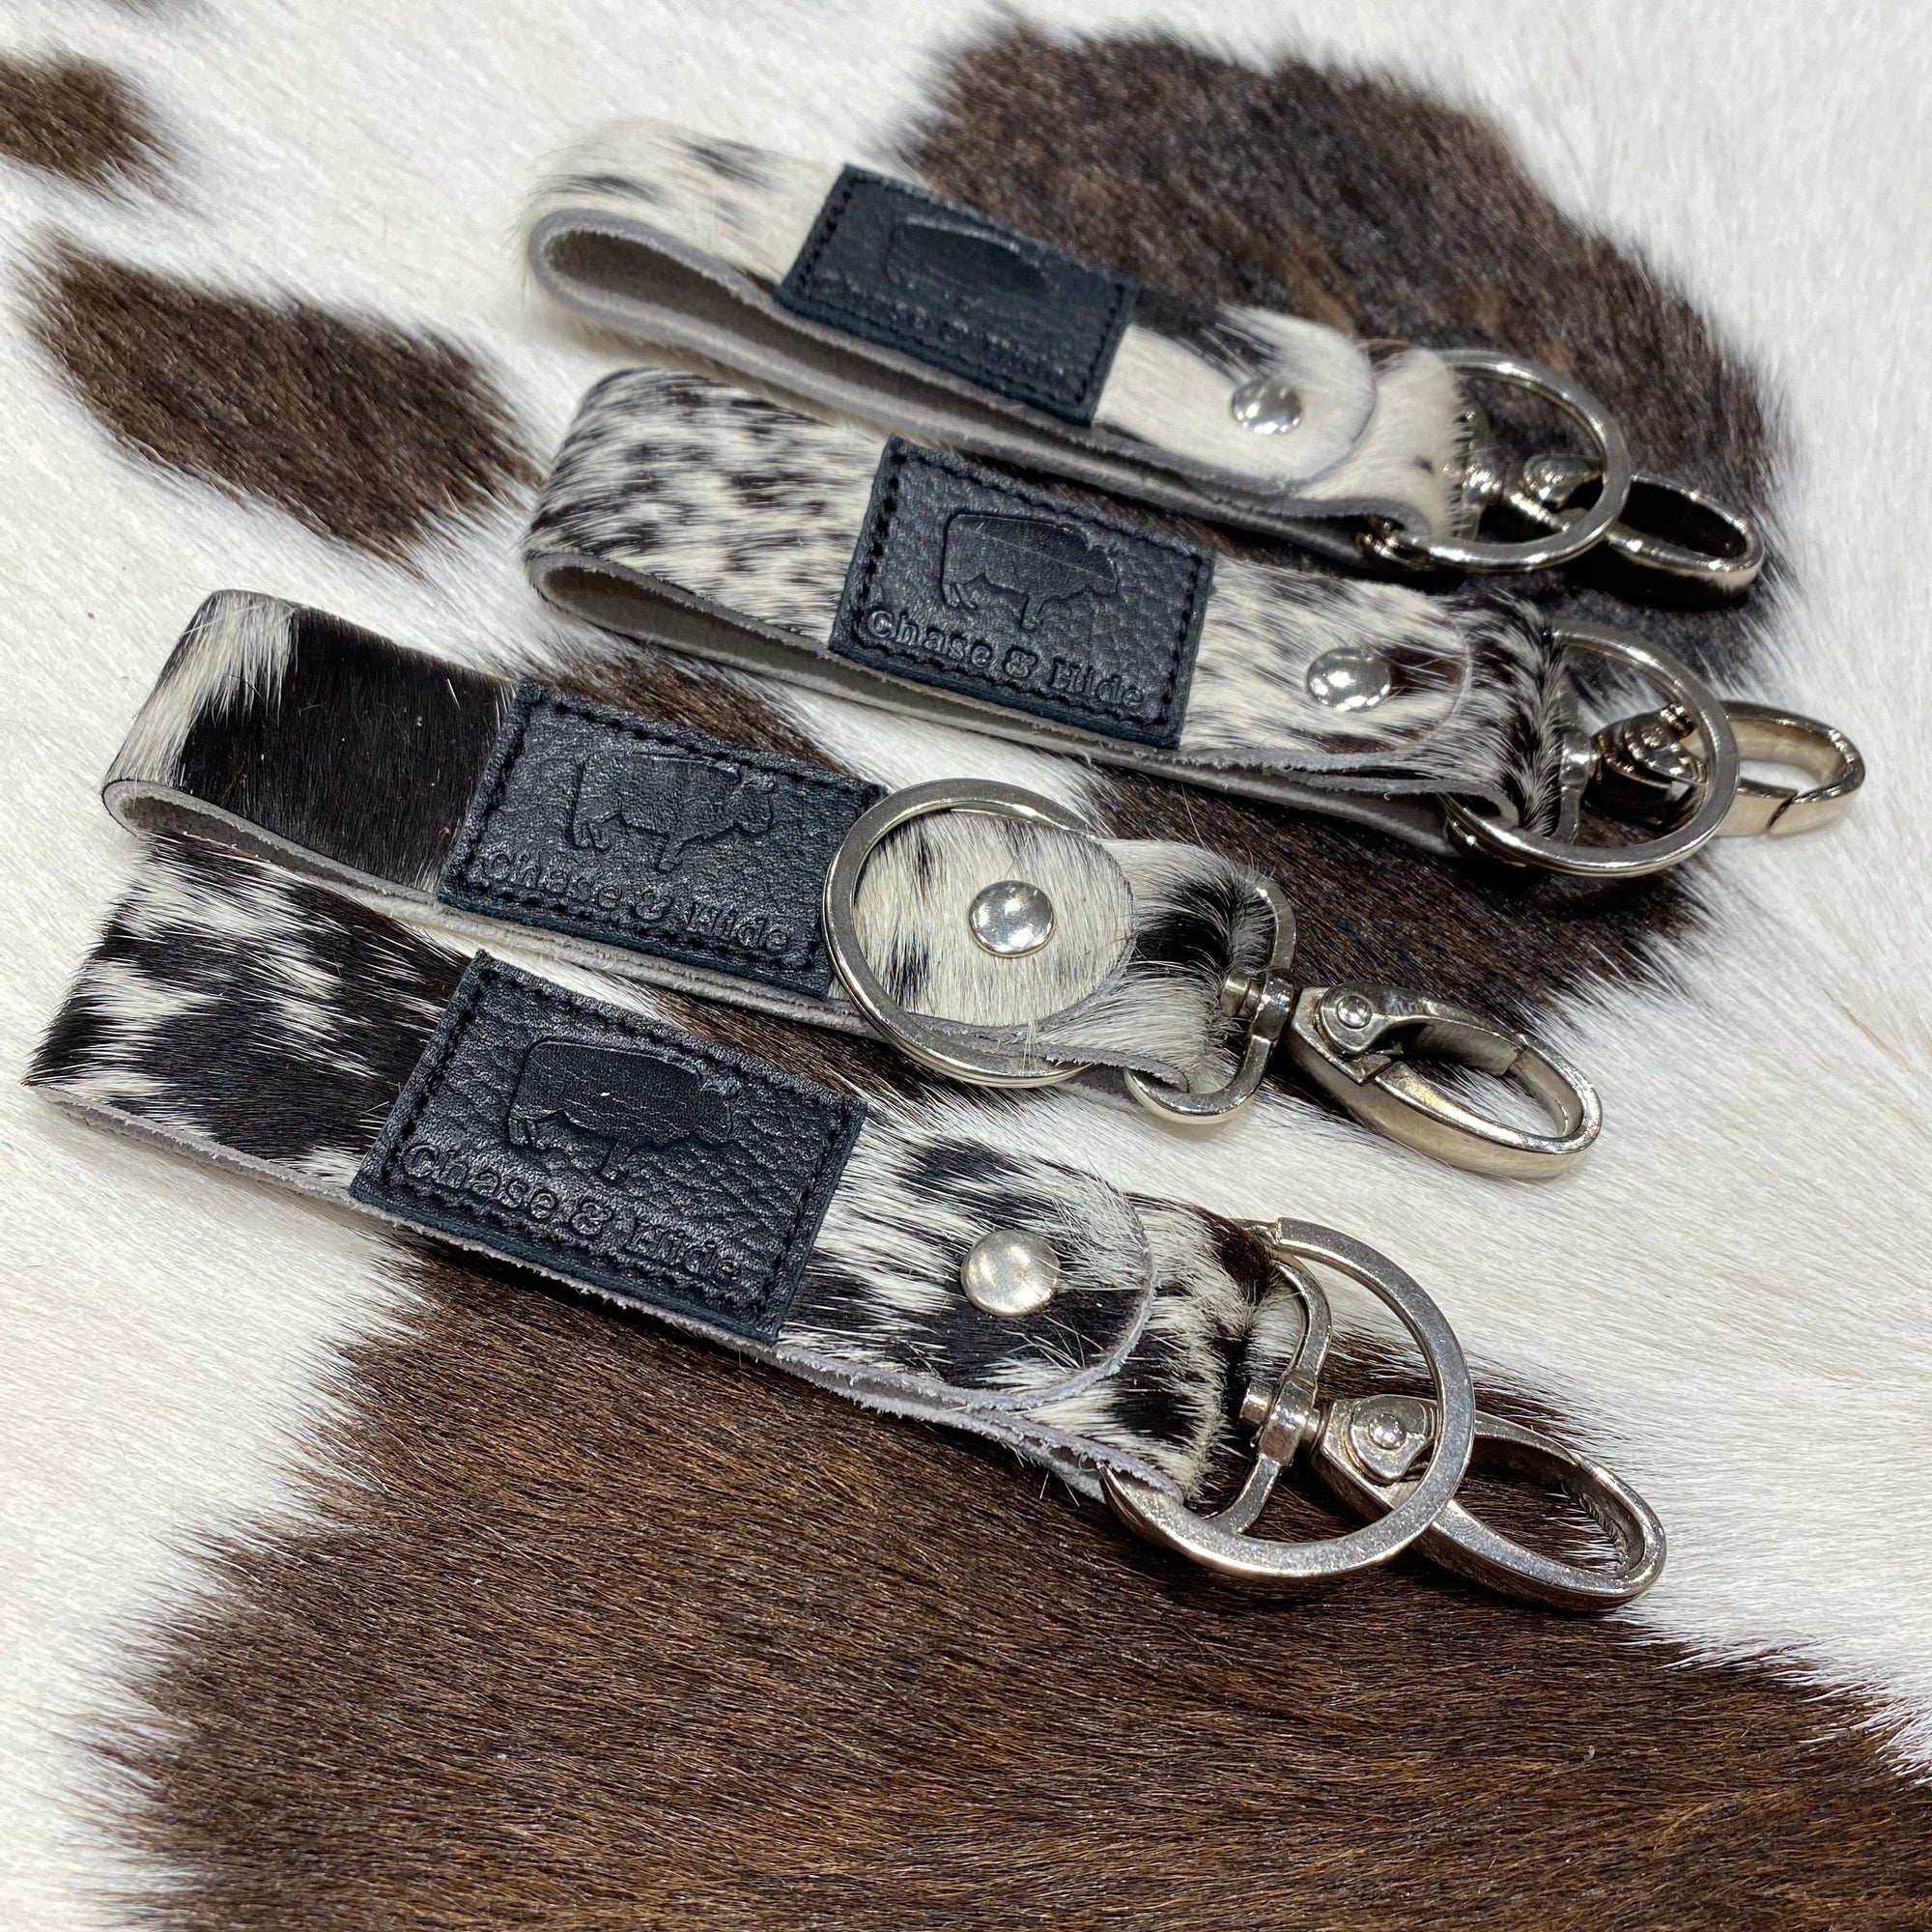 Leather Dog Key Chain - Assorted